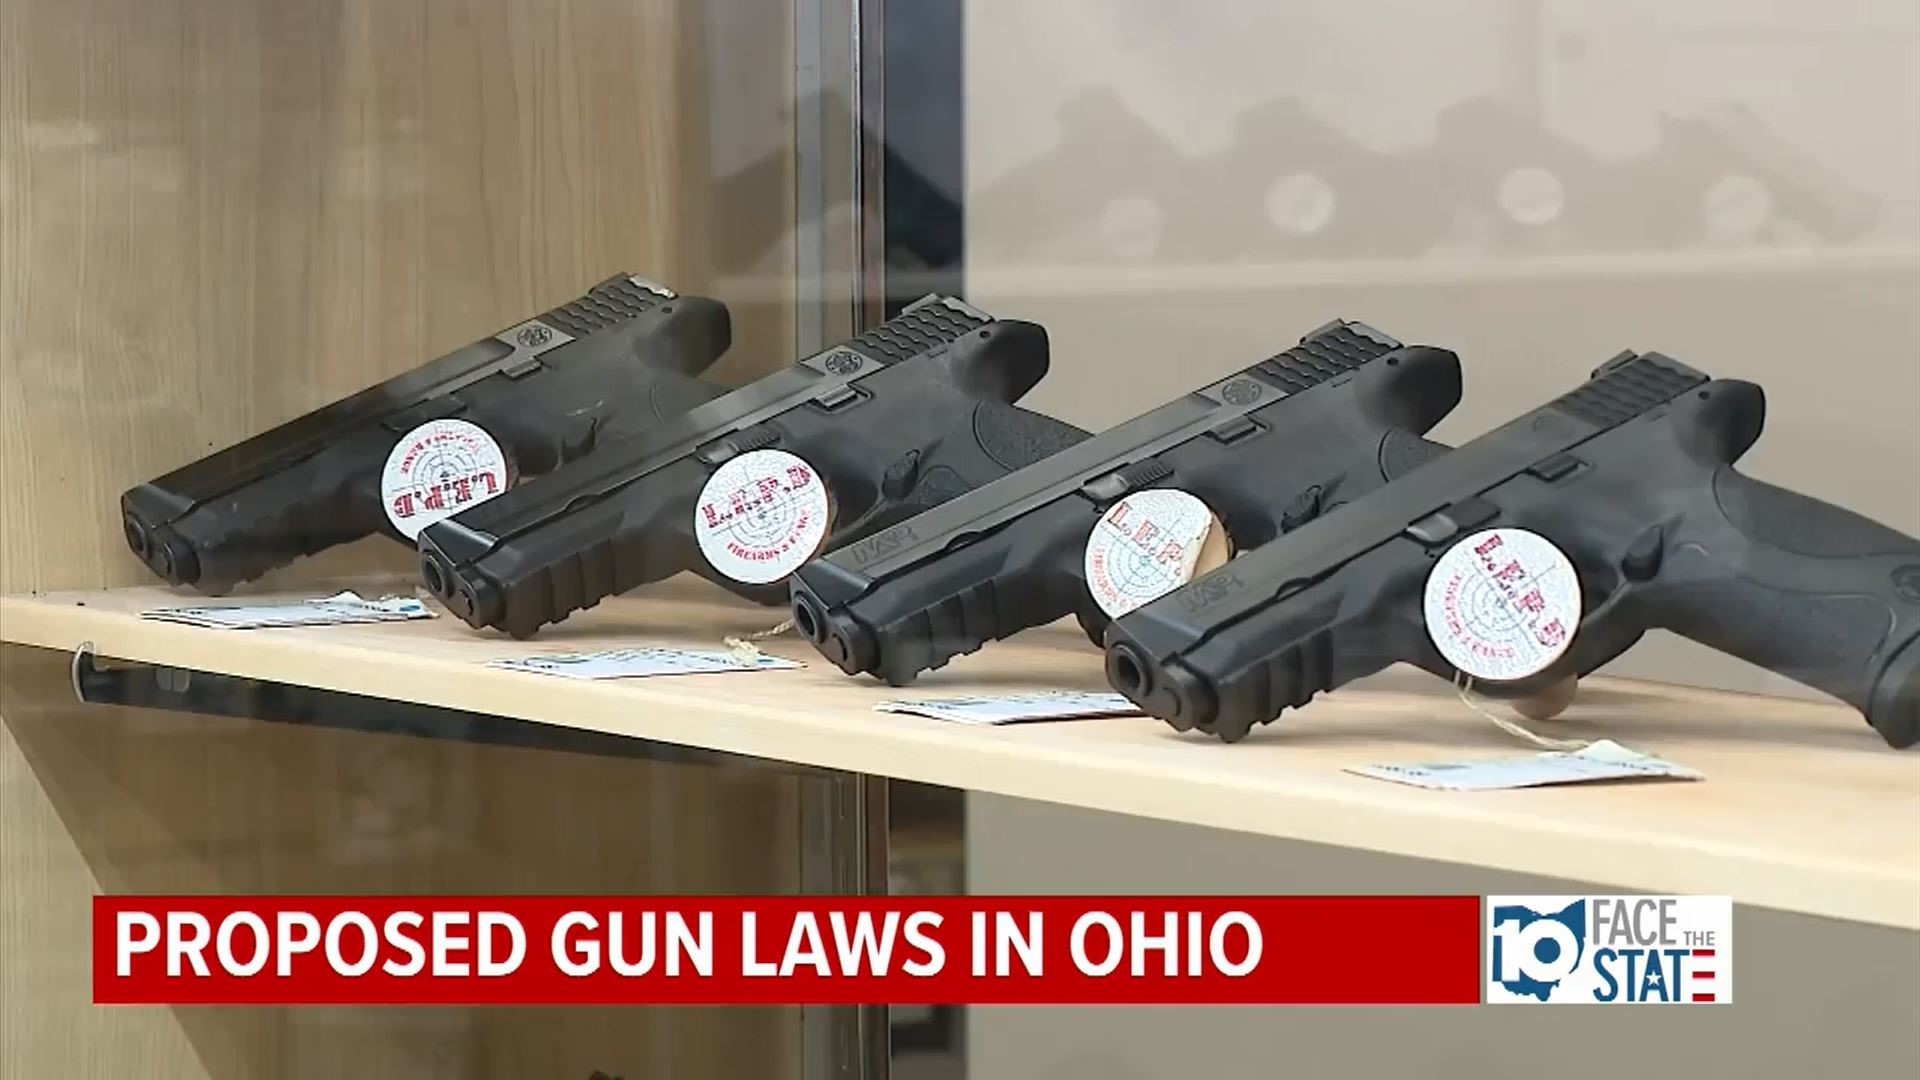 This week's Face the State takes a look at proposed gun legislation in Ohio in wake of the tragic shooting at a Texas elementary school.